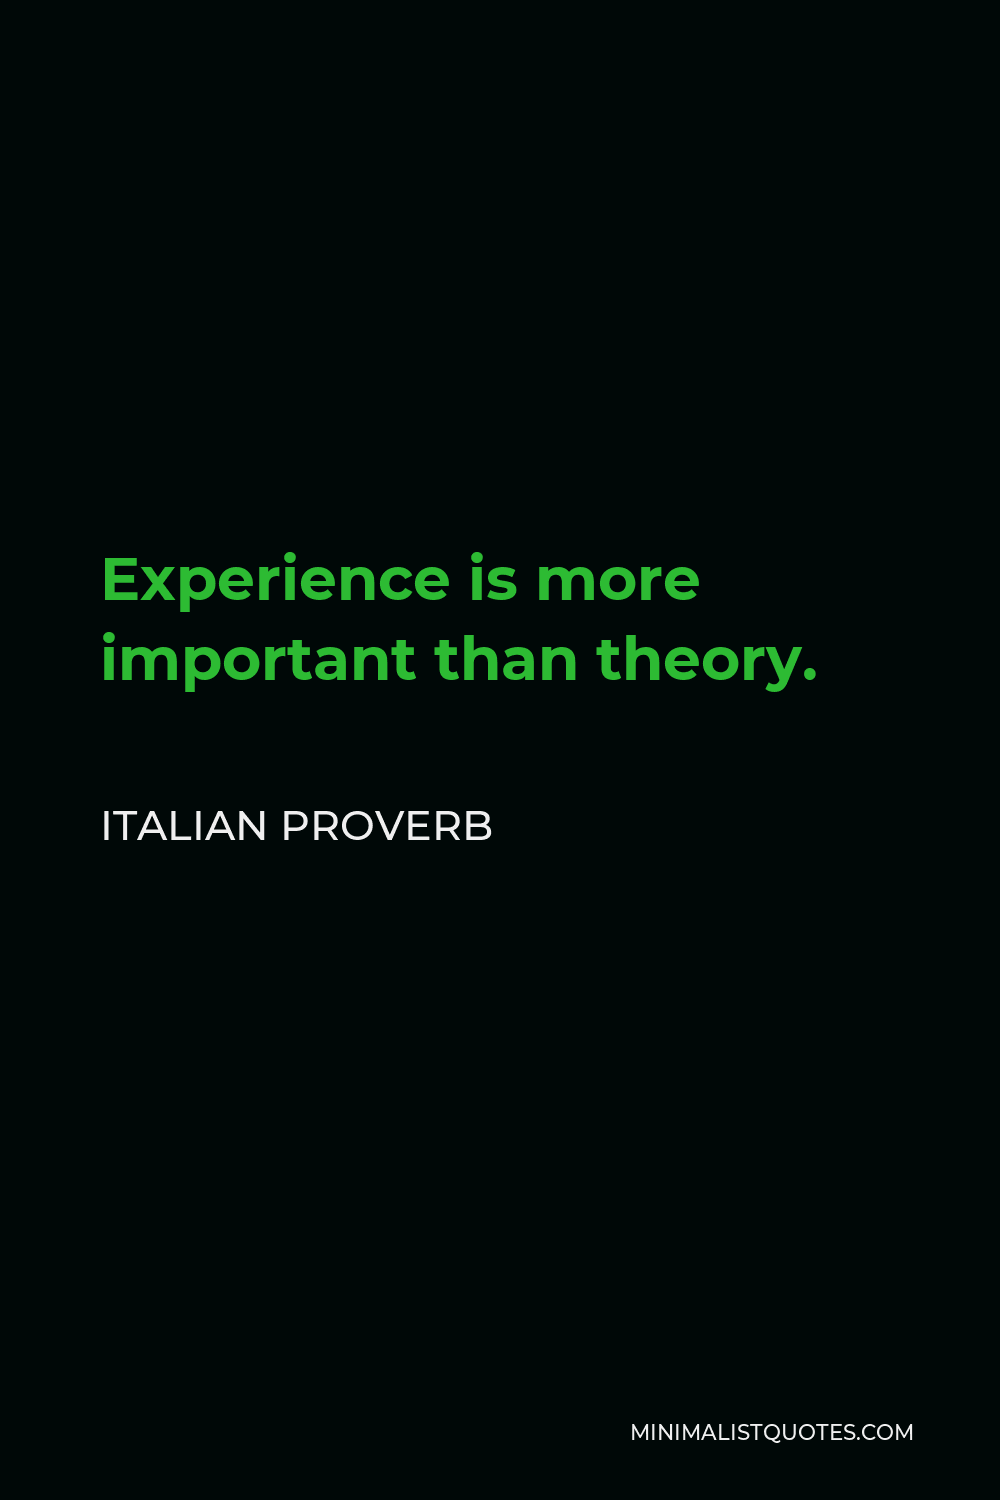 Italian Proverb Quote - Experience is more important than theory.